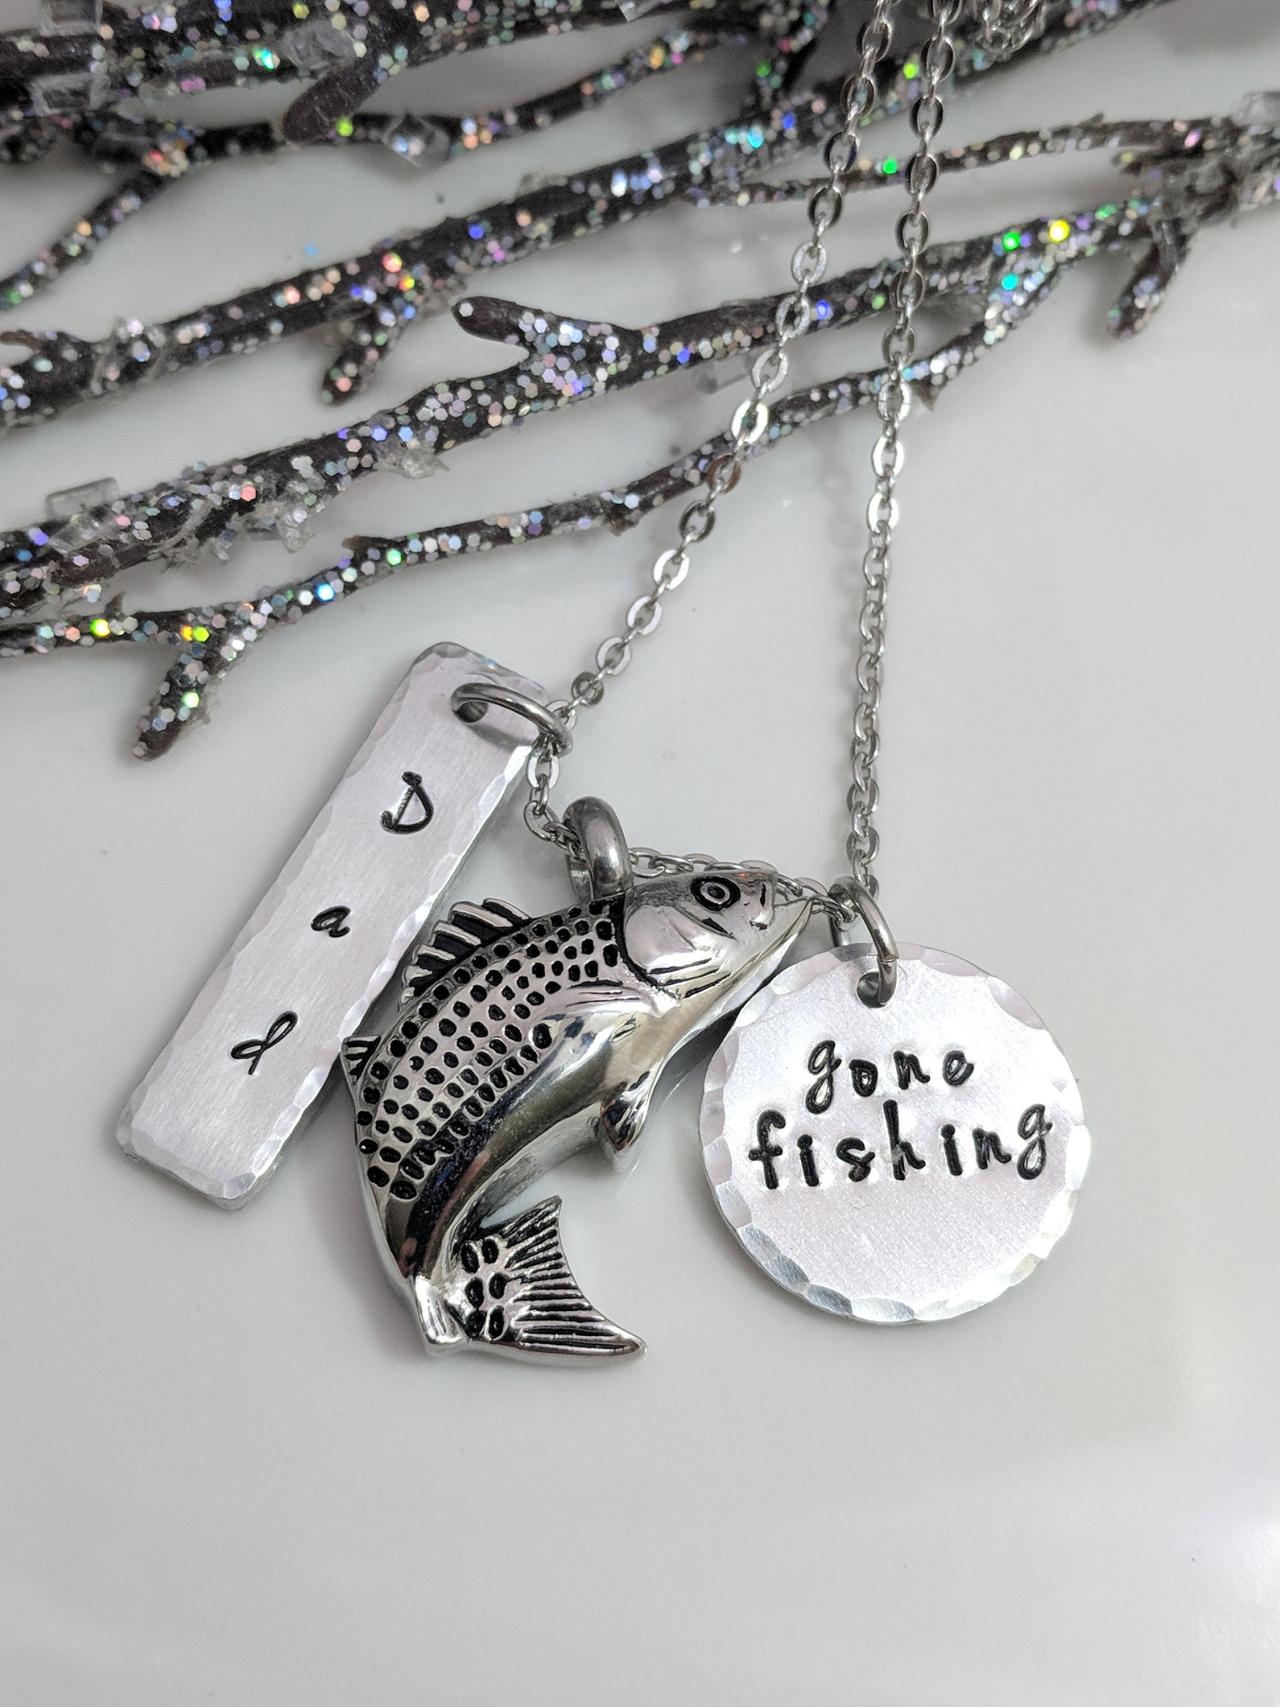 Gone Fishing Urn Hand Stamped Necklace, Ashes Necklace Hand Stamped Jewelry, Memorial Gift, Fishing In Heaven, Sympathy Gift, Personalized